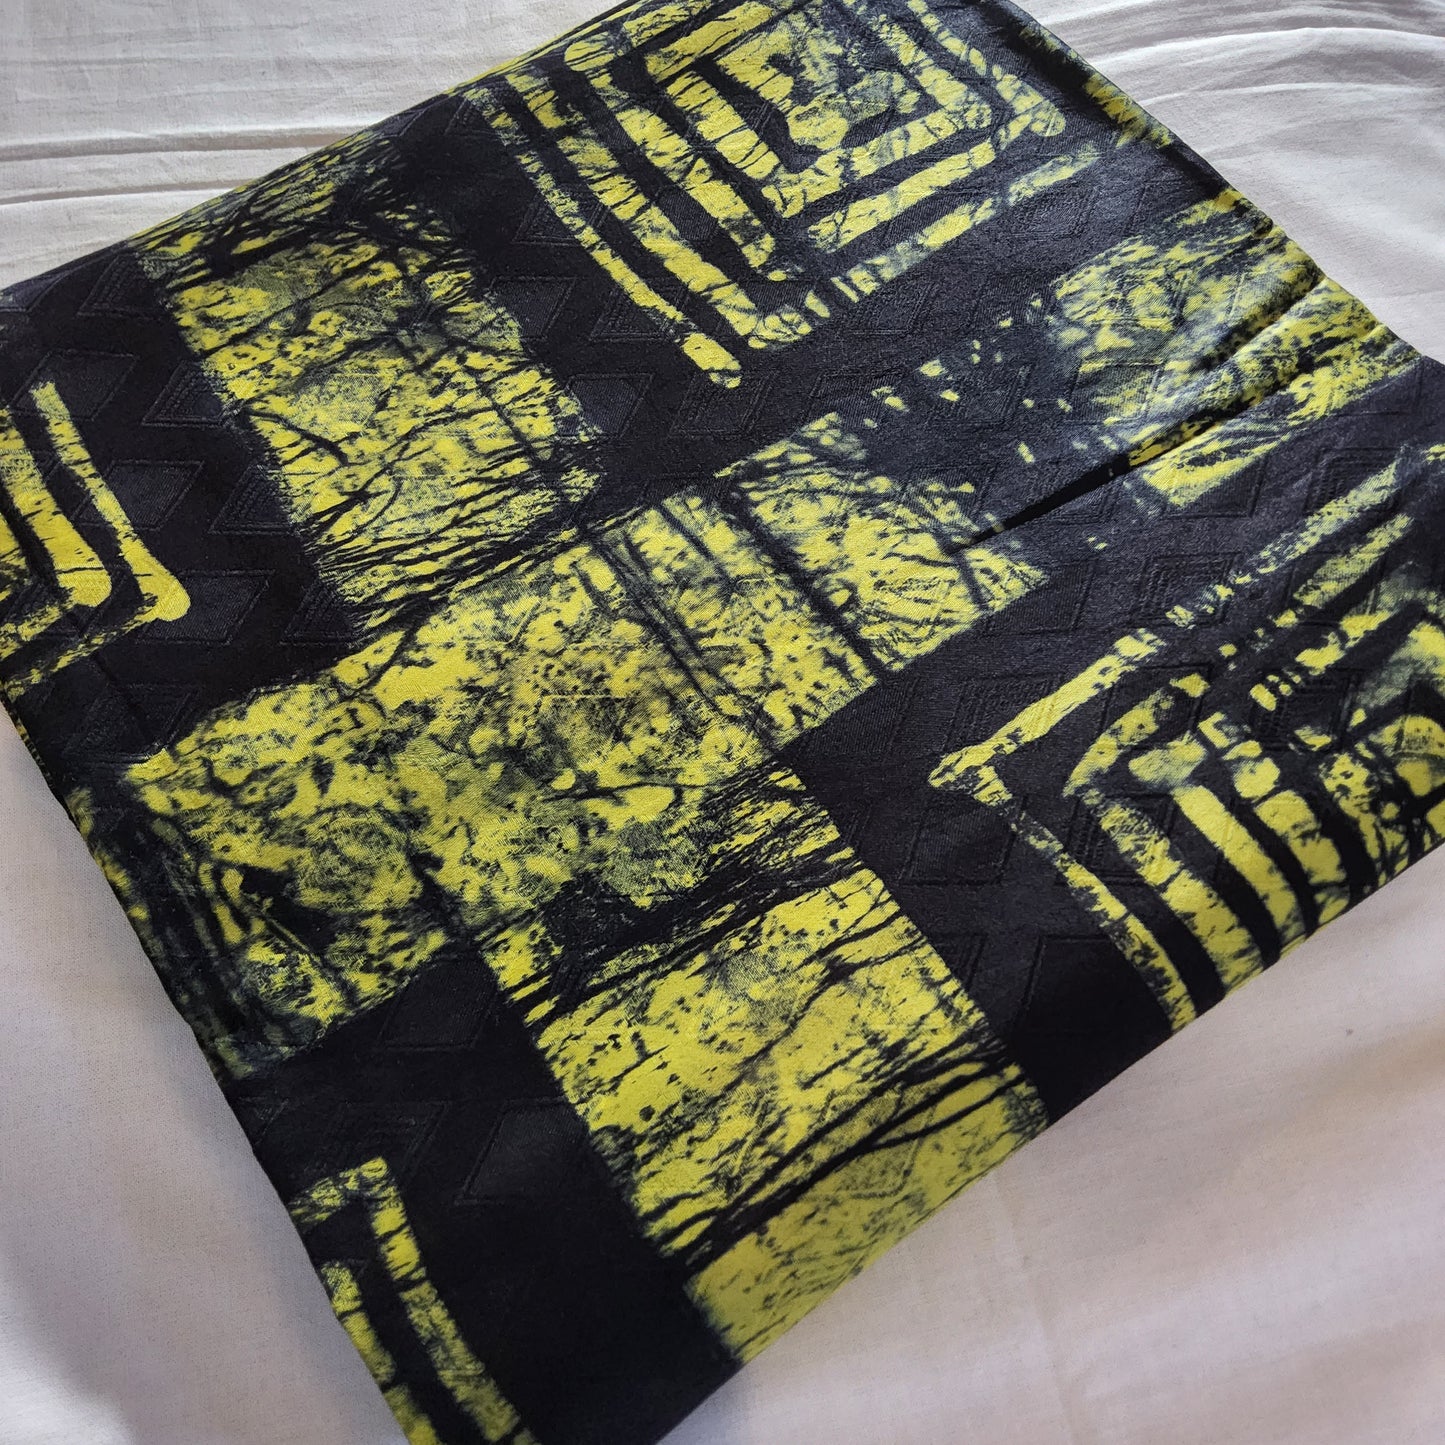 ADIRE - CLASSIC WEST AFRICAN PATTERN HAND PRINT FABRIC 100% COTTON BROCADE- PER METER